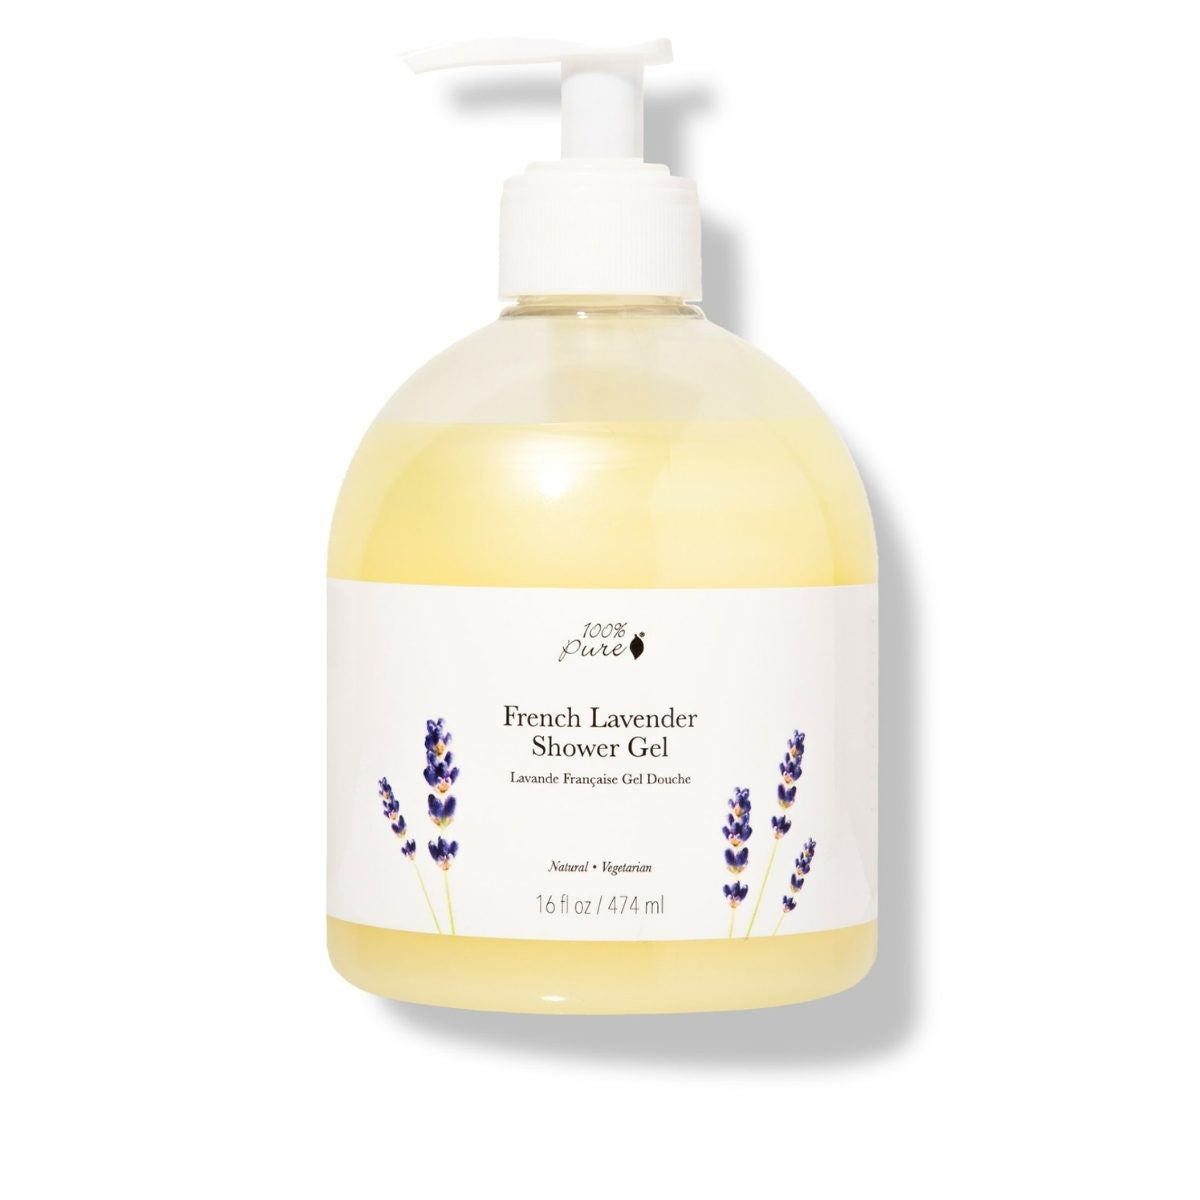 100 Percent Pure French Lavender Shower Gel - The Green Kiss